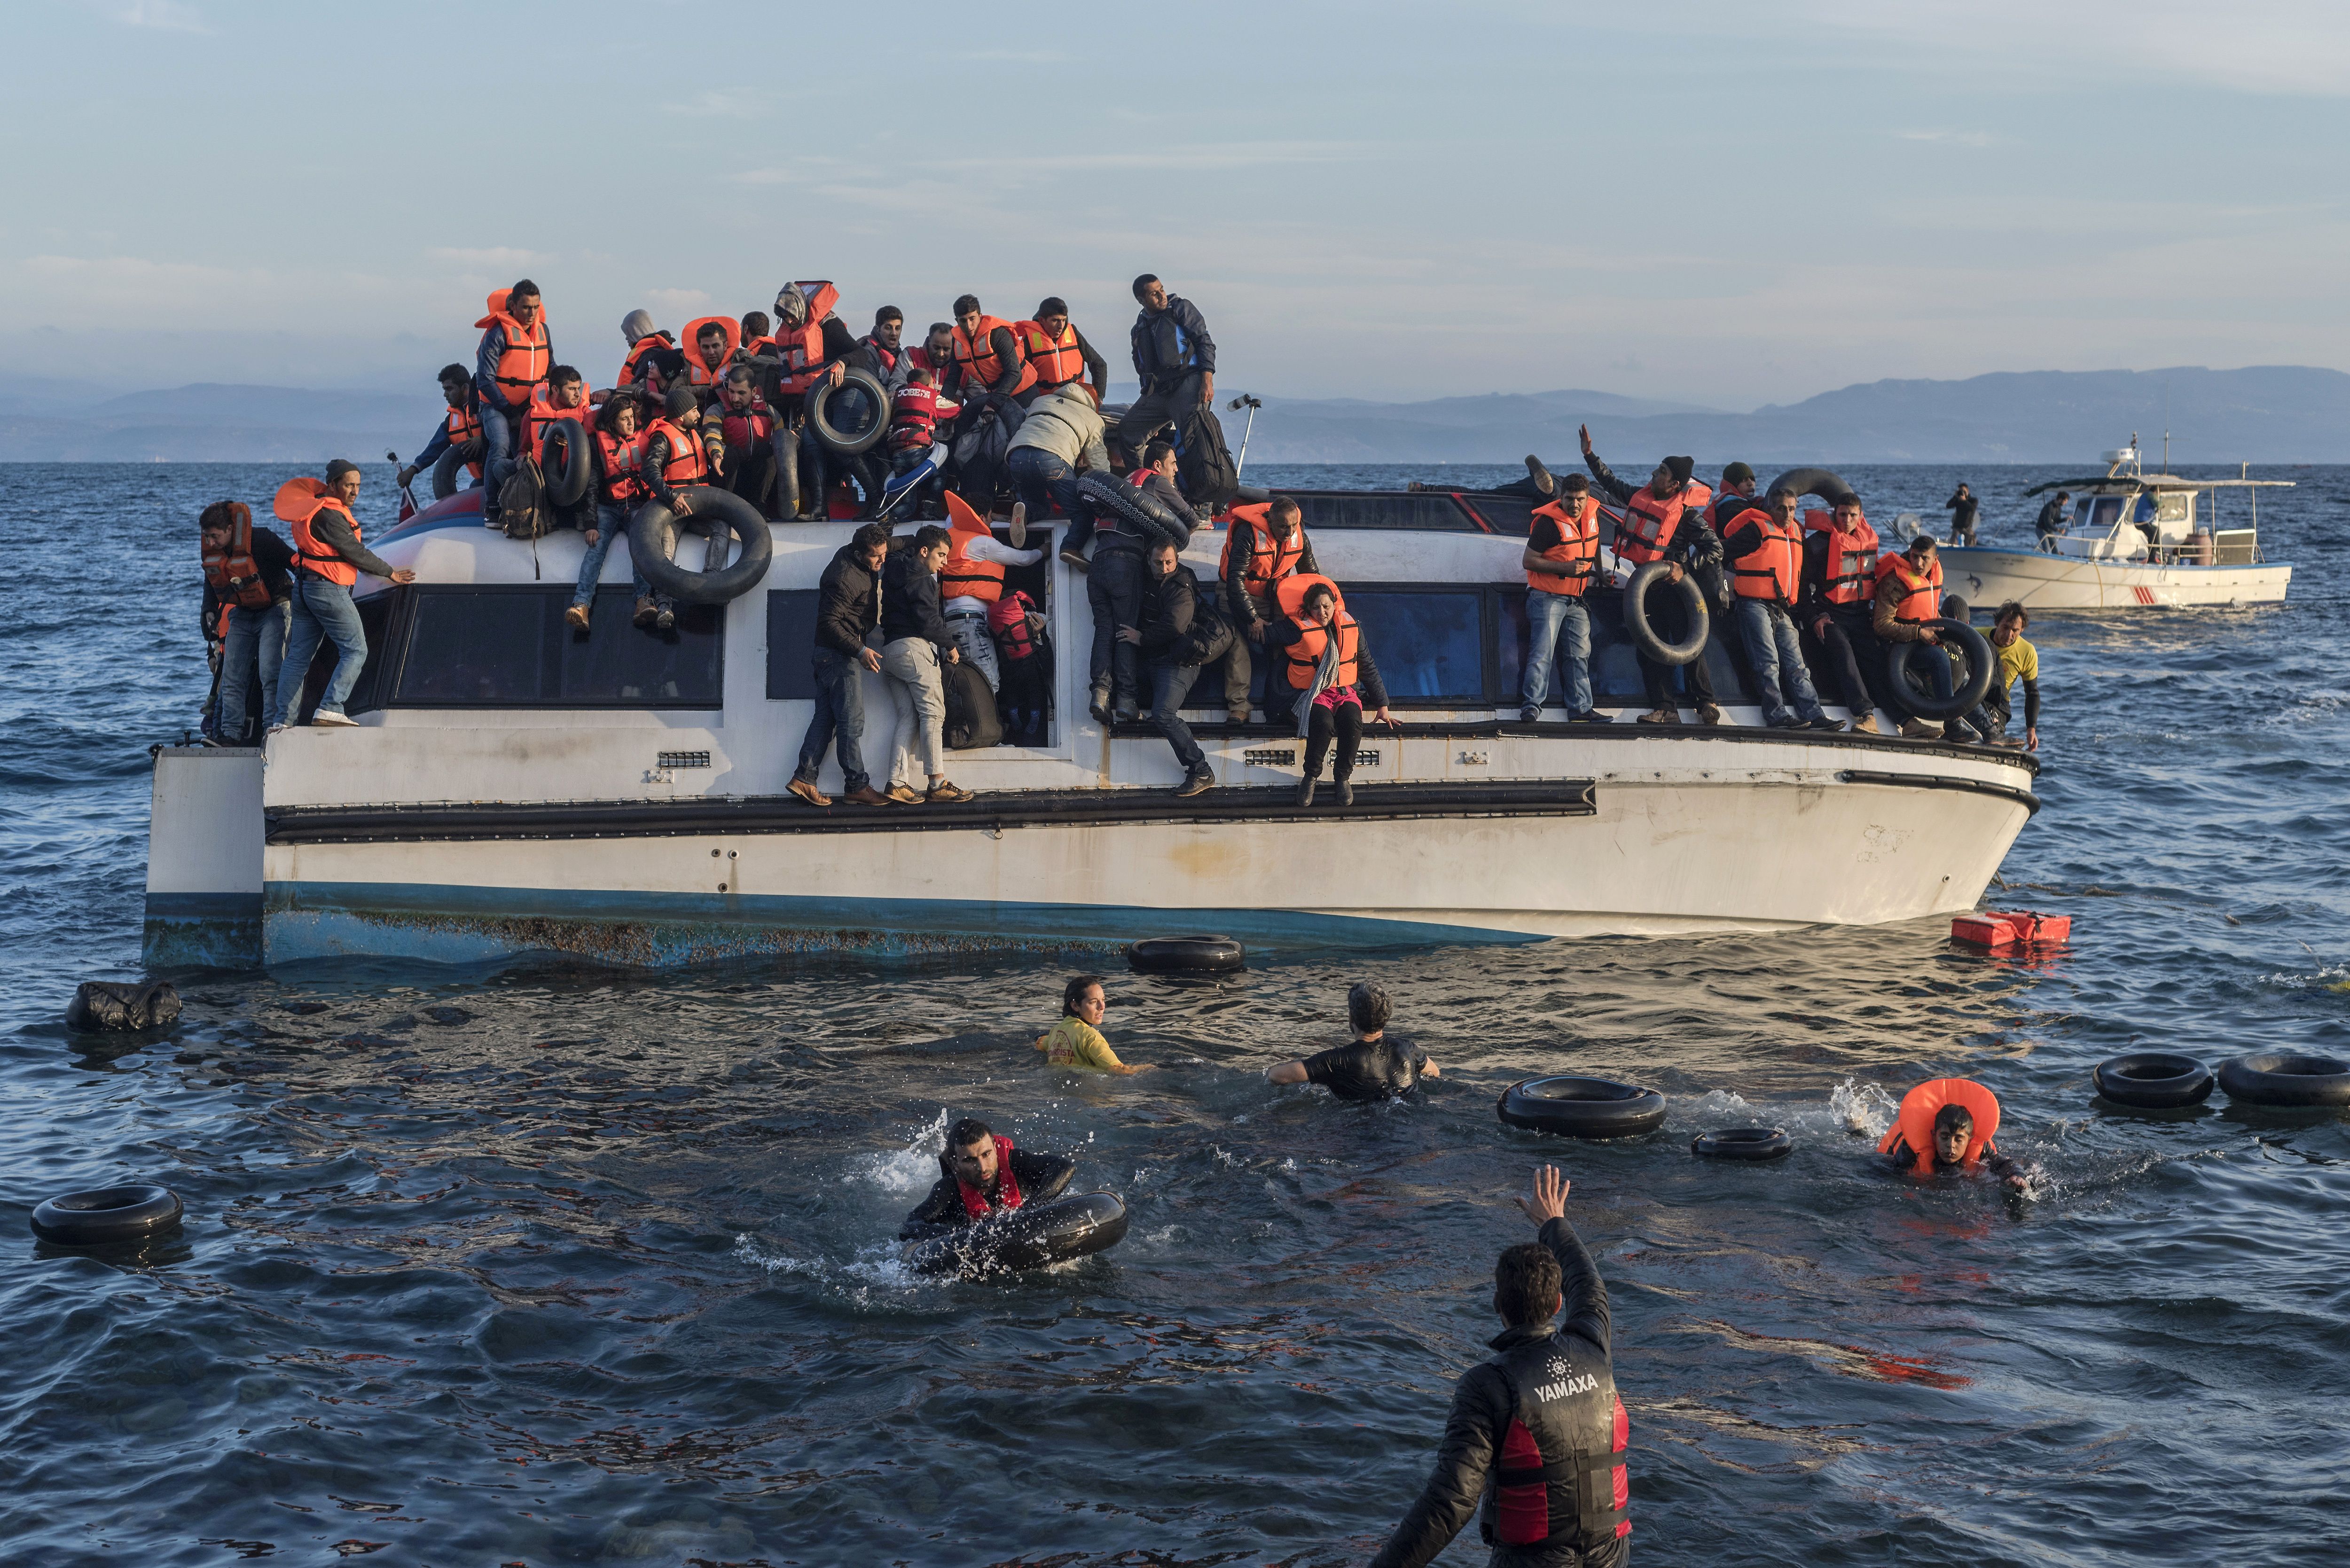 Syrian and Iraqi refugees arrive from Turkey to Skala Sykamias, Lesbos island, Greece. Spanish volunteers (life rescue team with yellow-red clothes) are from "Proactiva open arms." Image courtesy Ggia / Creative Commons 4.0.